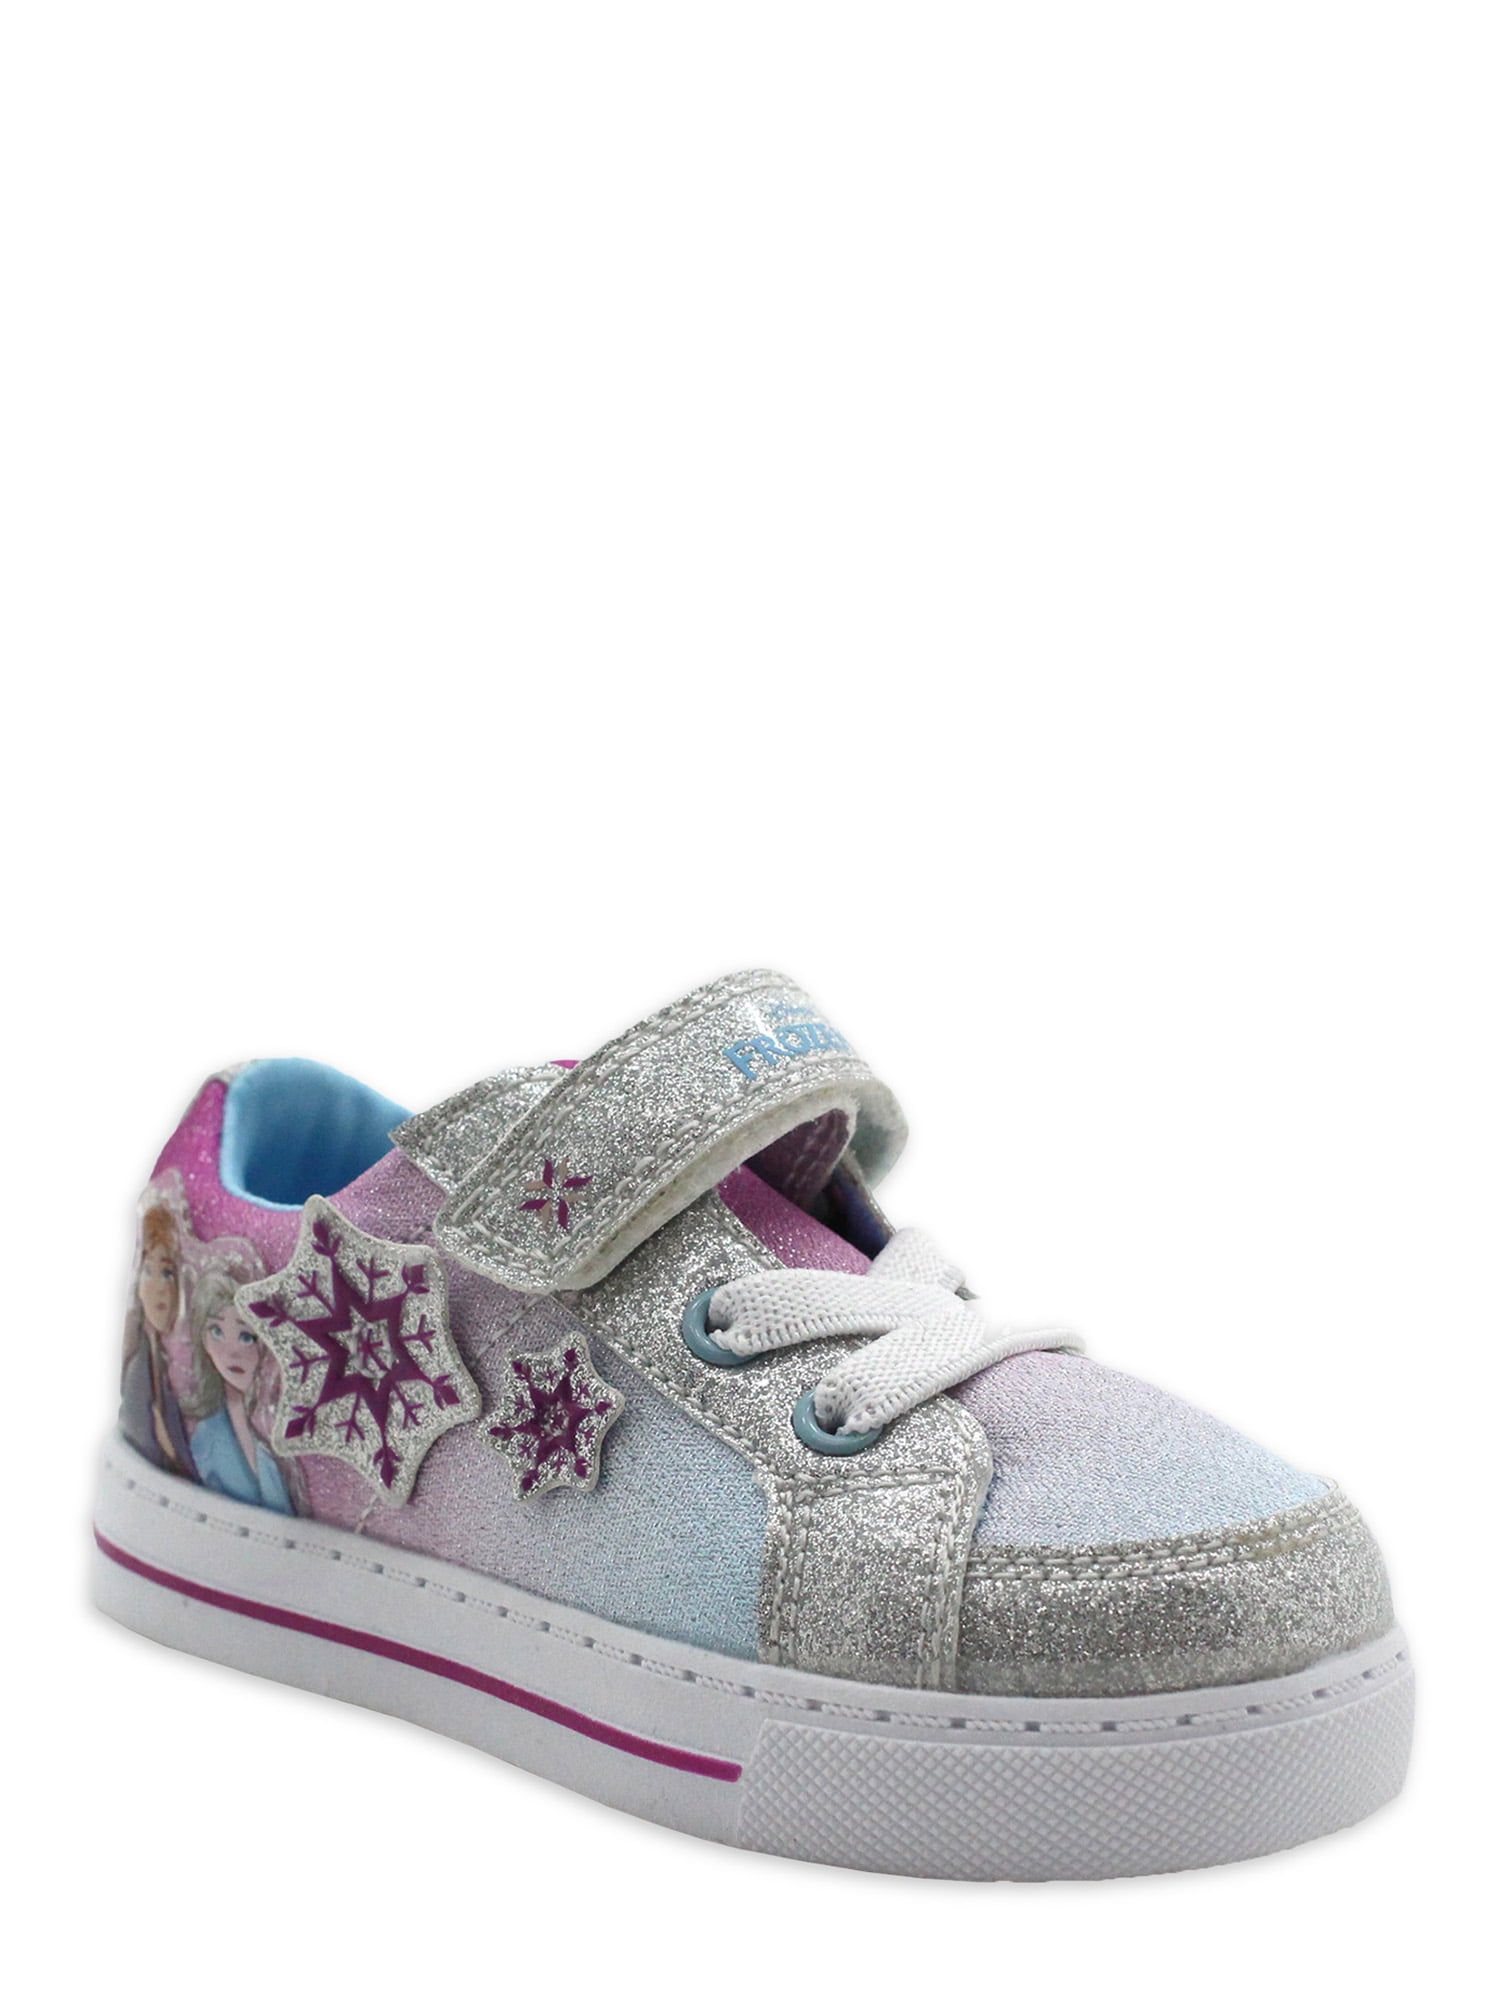 Blue/Pink Disney Frozen Elsa Anna High-Top Shoes sneakers Toddler/Youth 